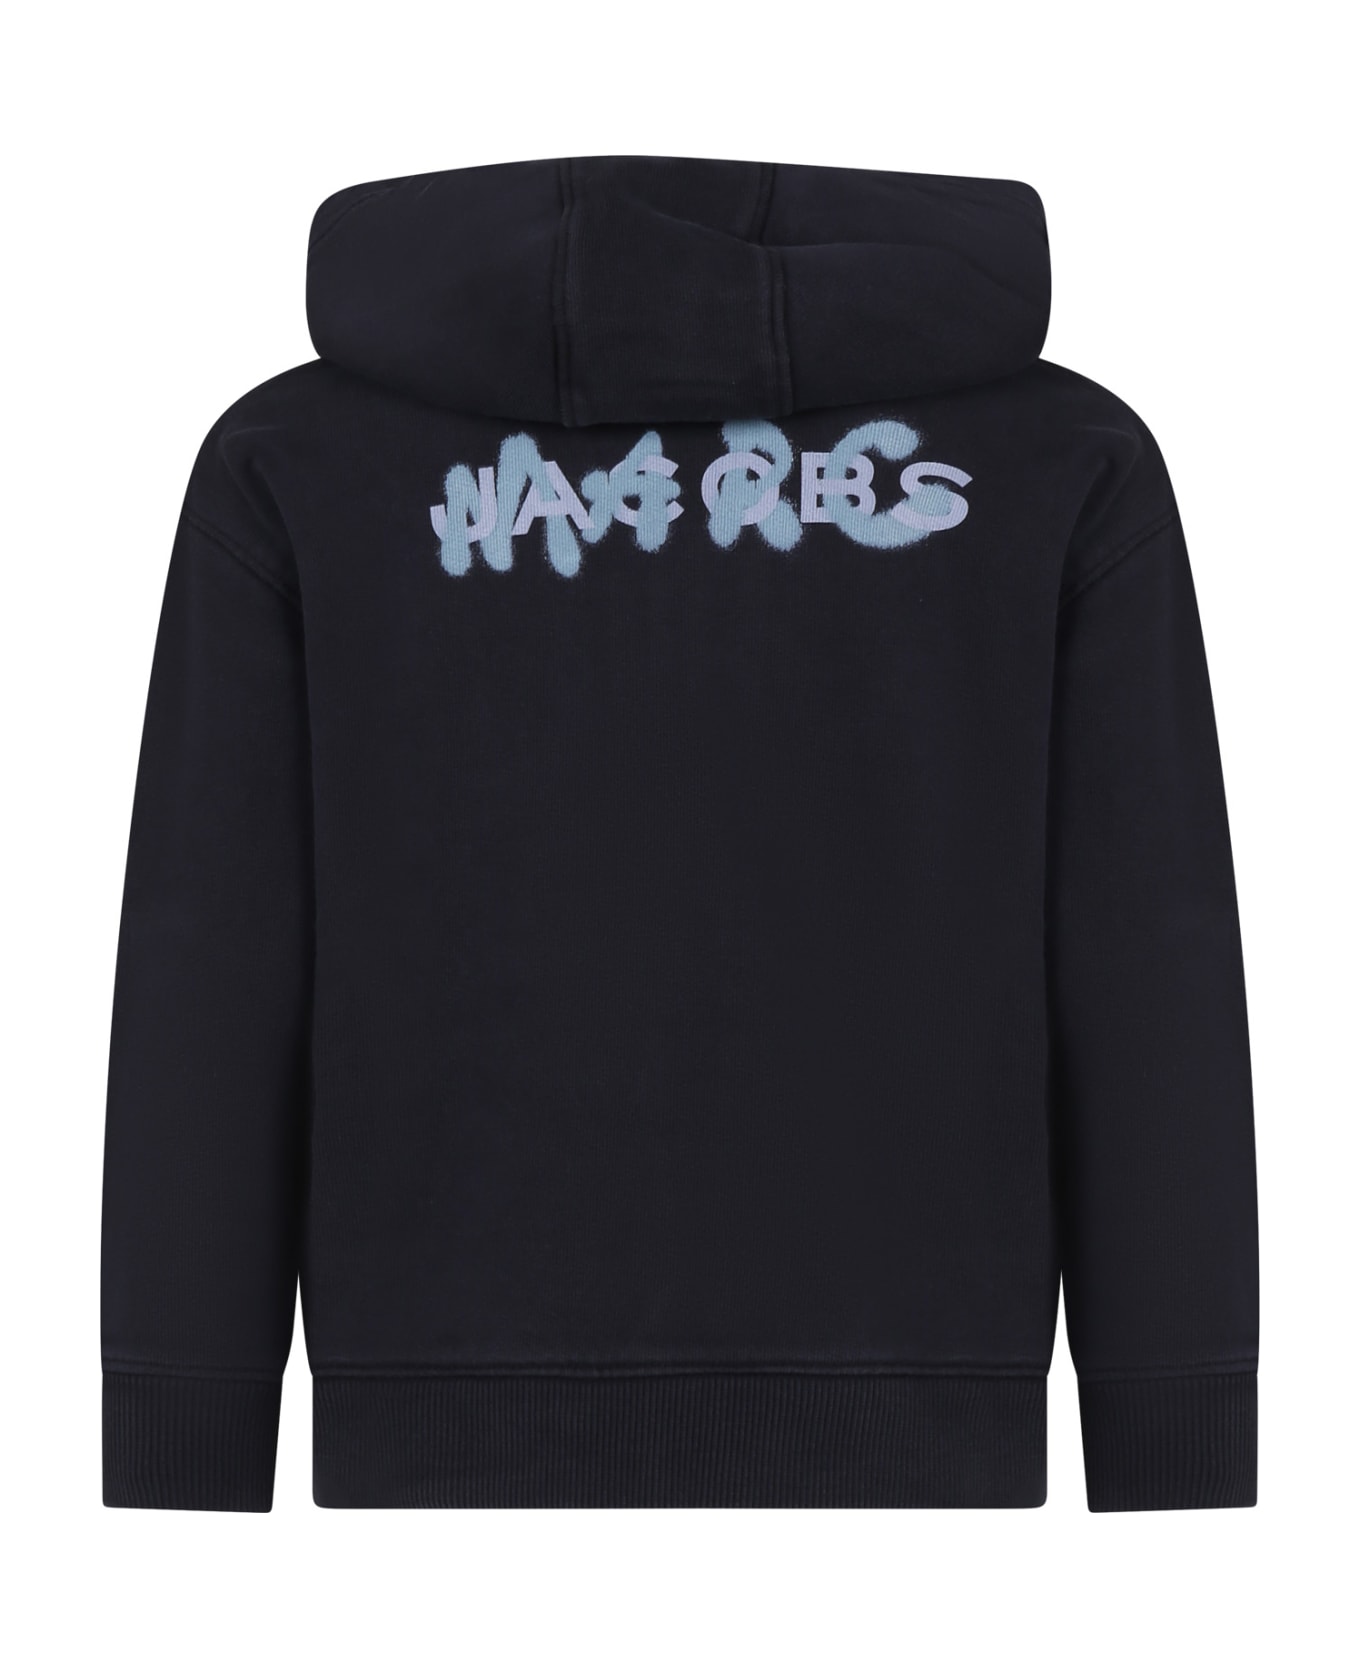 Marc Jacobs Black Sweat-shirt For Kids With Logo - Black